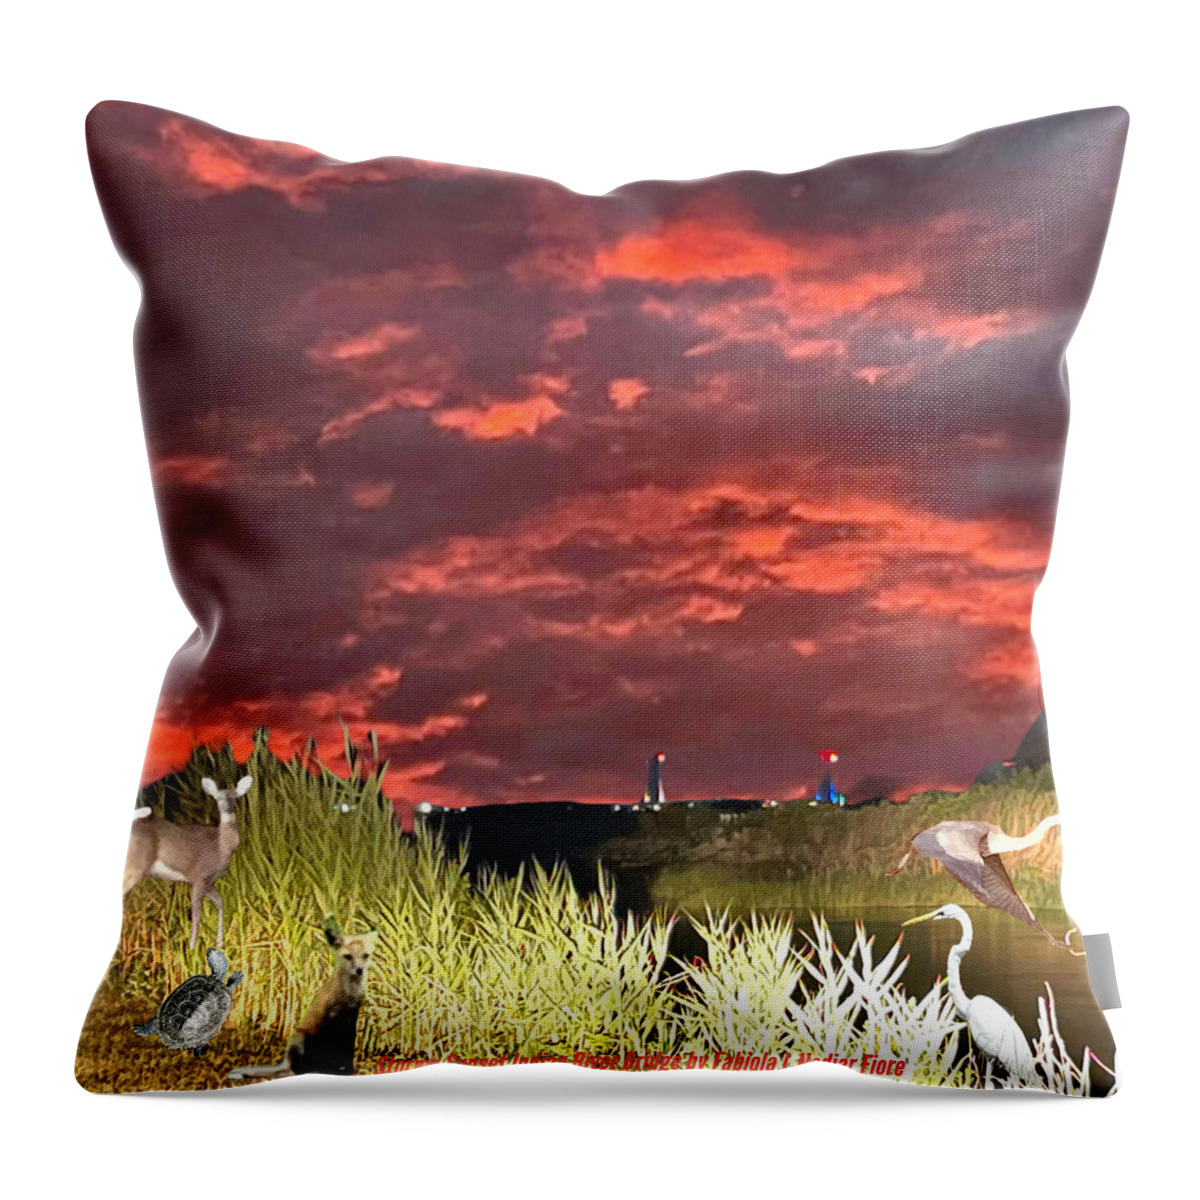 Stormy Throw Pillow featuring the photograph Stormy Sunset Indian River Bridge by Fabiola L Nadjar Fiore